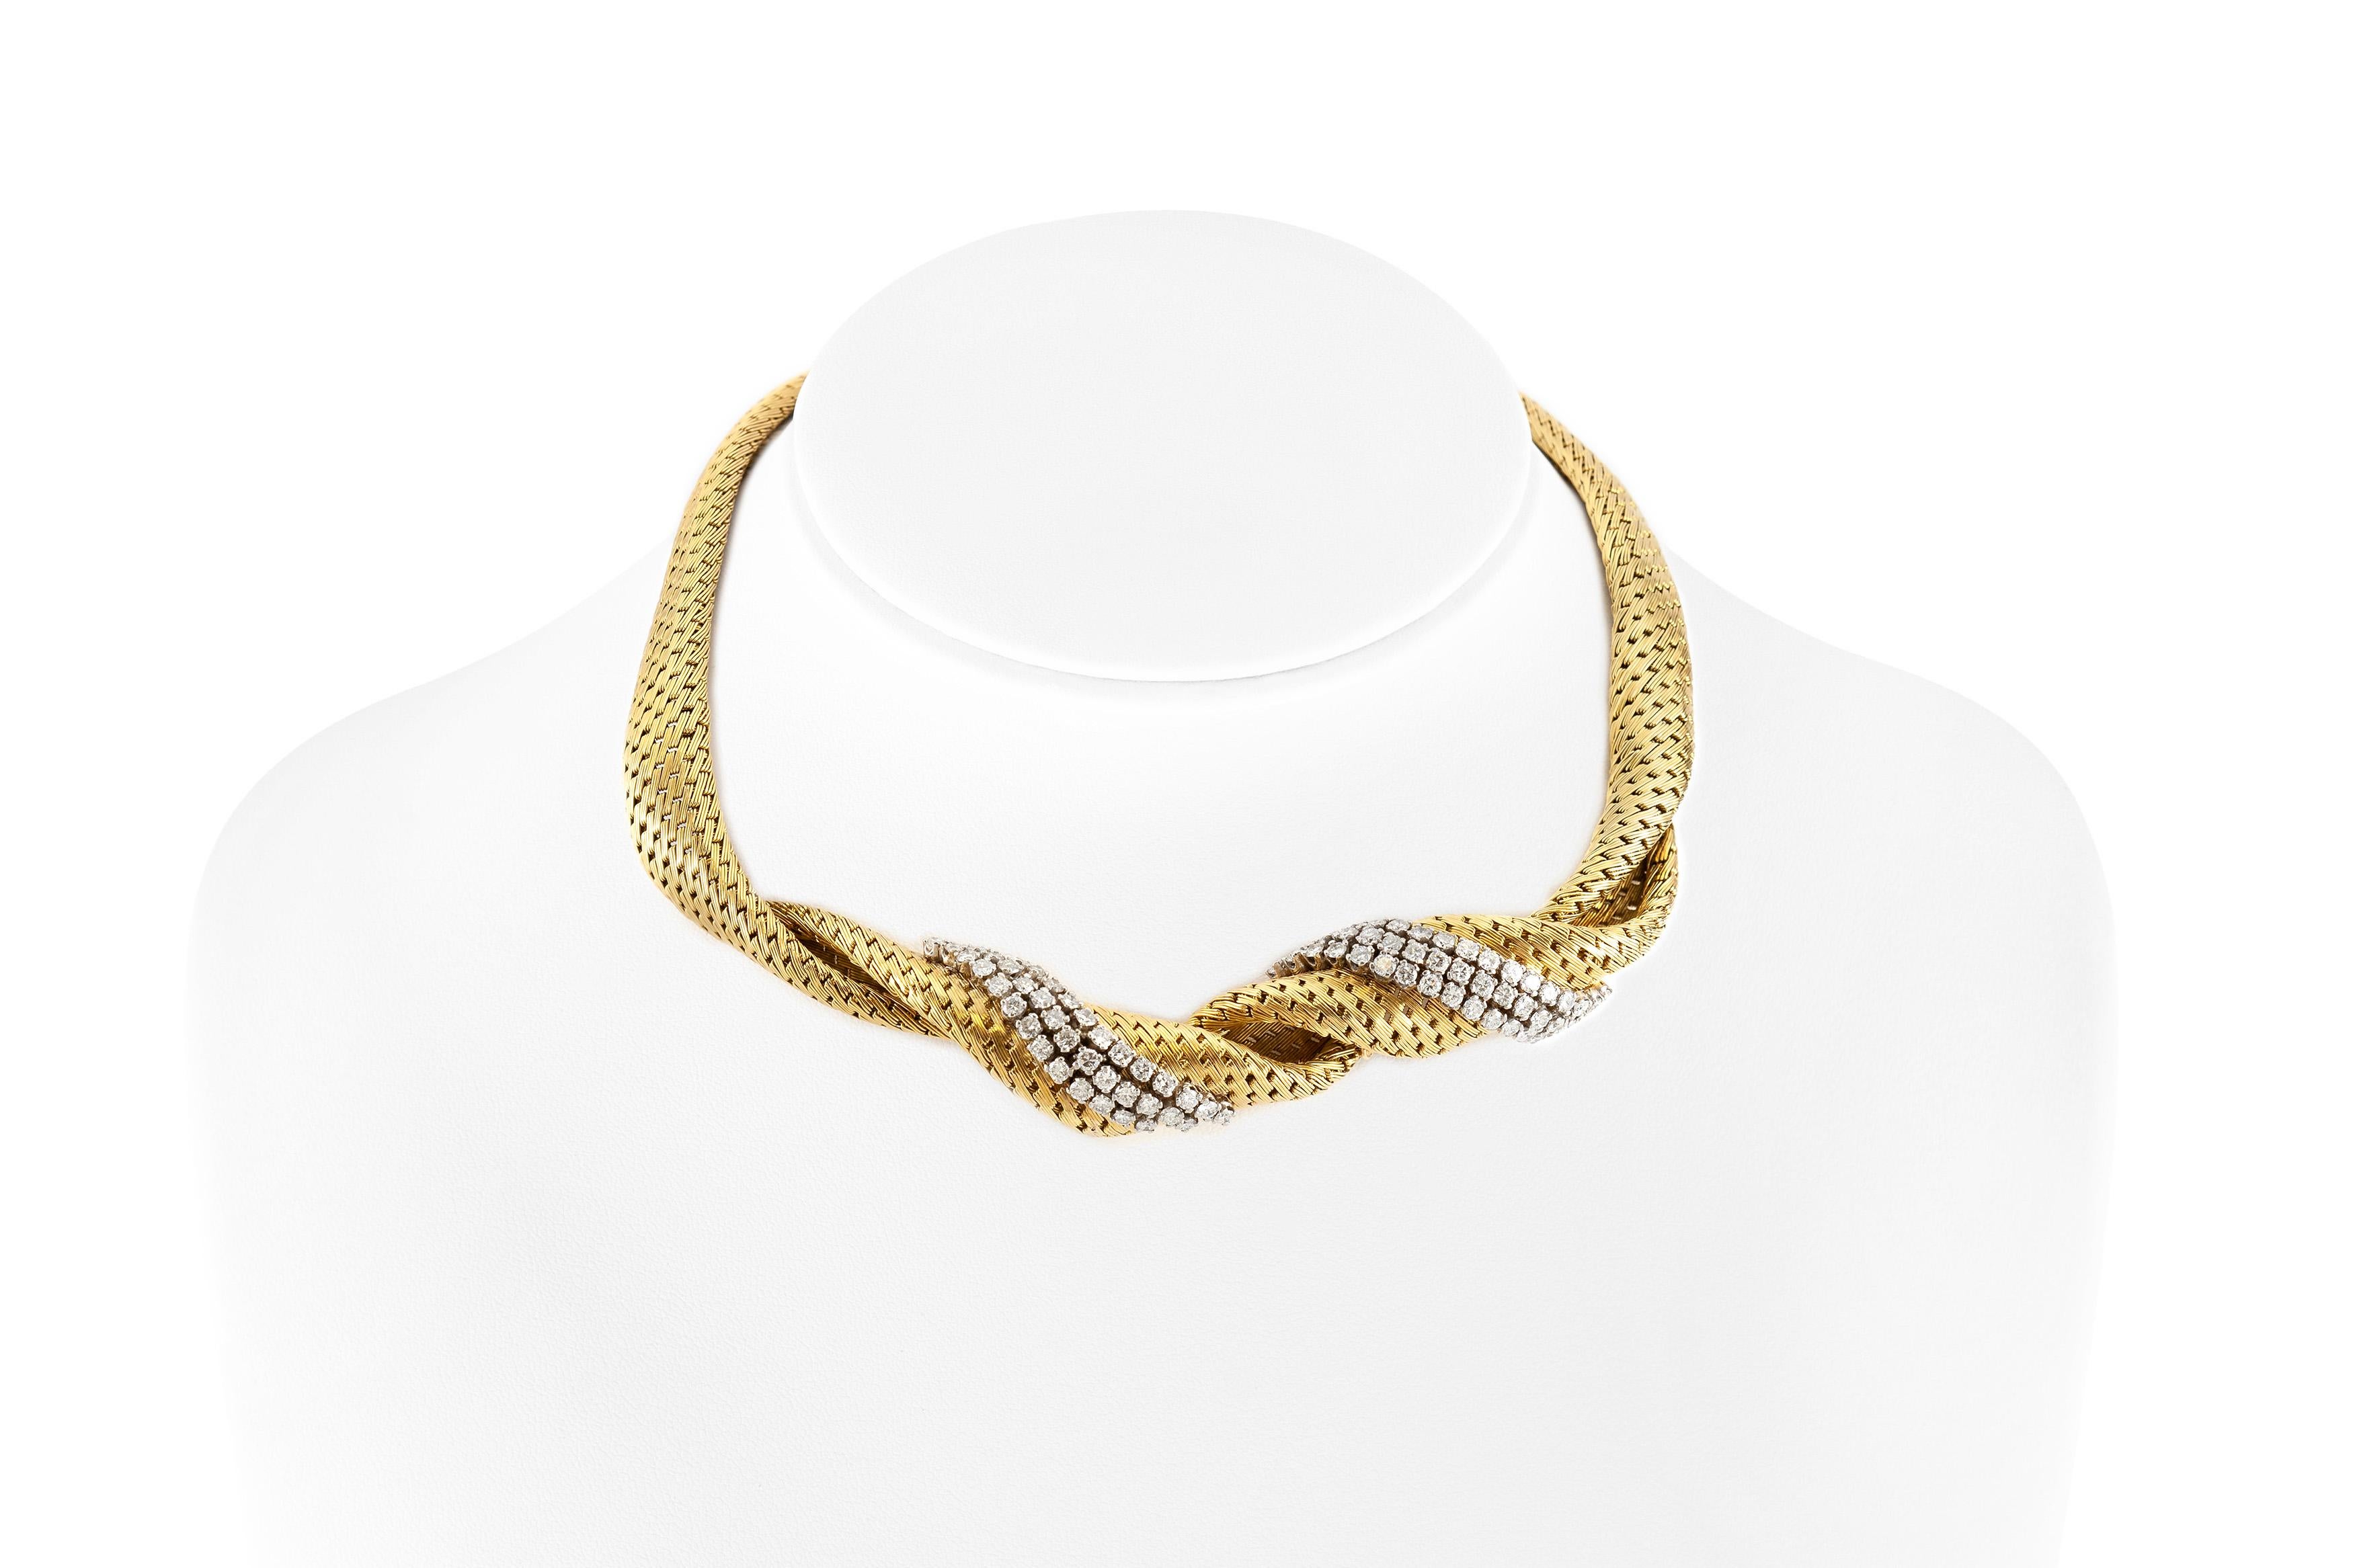 Brilliant Cut Beautiful 18 Karat Choker with Diamond Spiral in Front For Sale